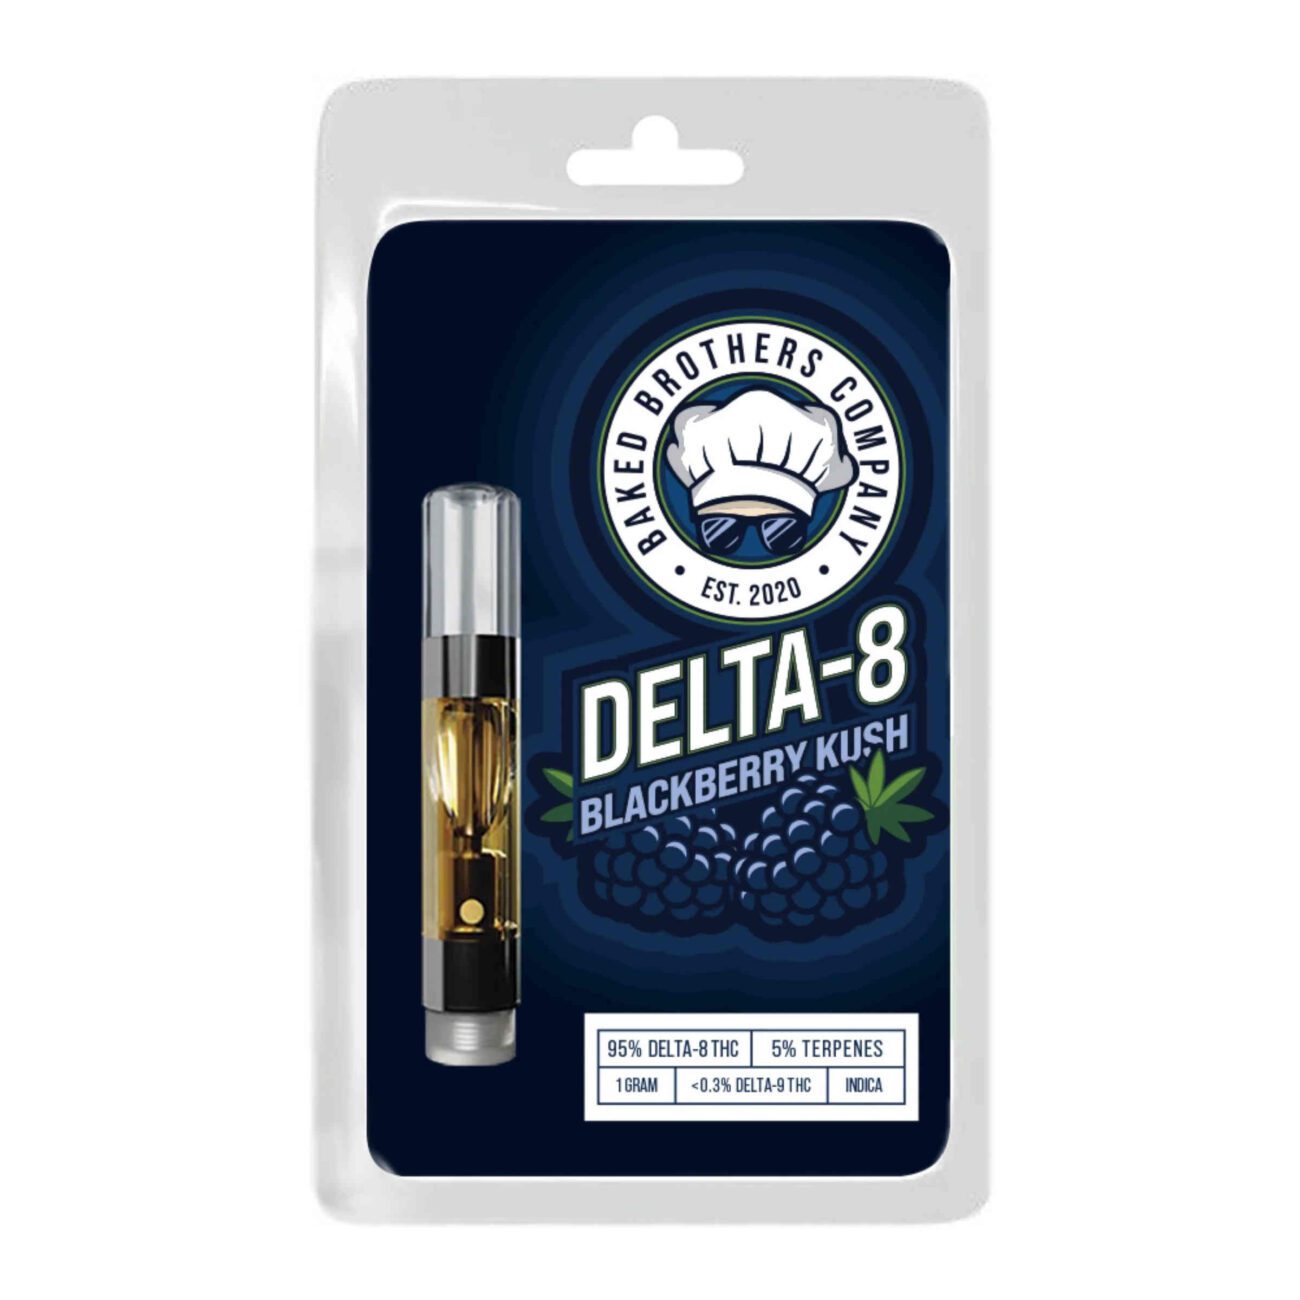 From CBD to THC oil, take notes as you learn more about how delta 8 cartridges help you manage anxiety, relieve stress, and improve your mood!